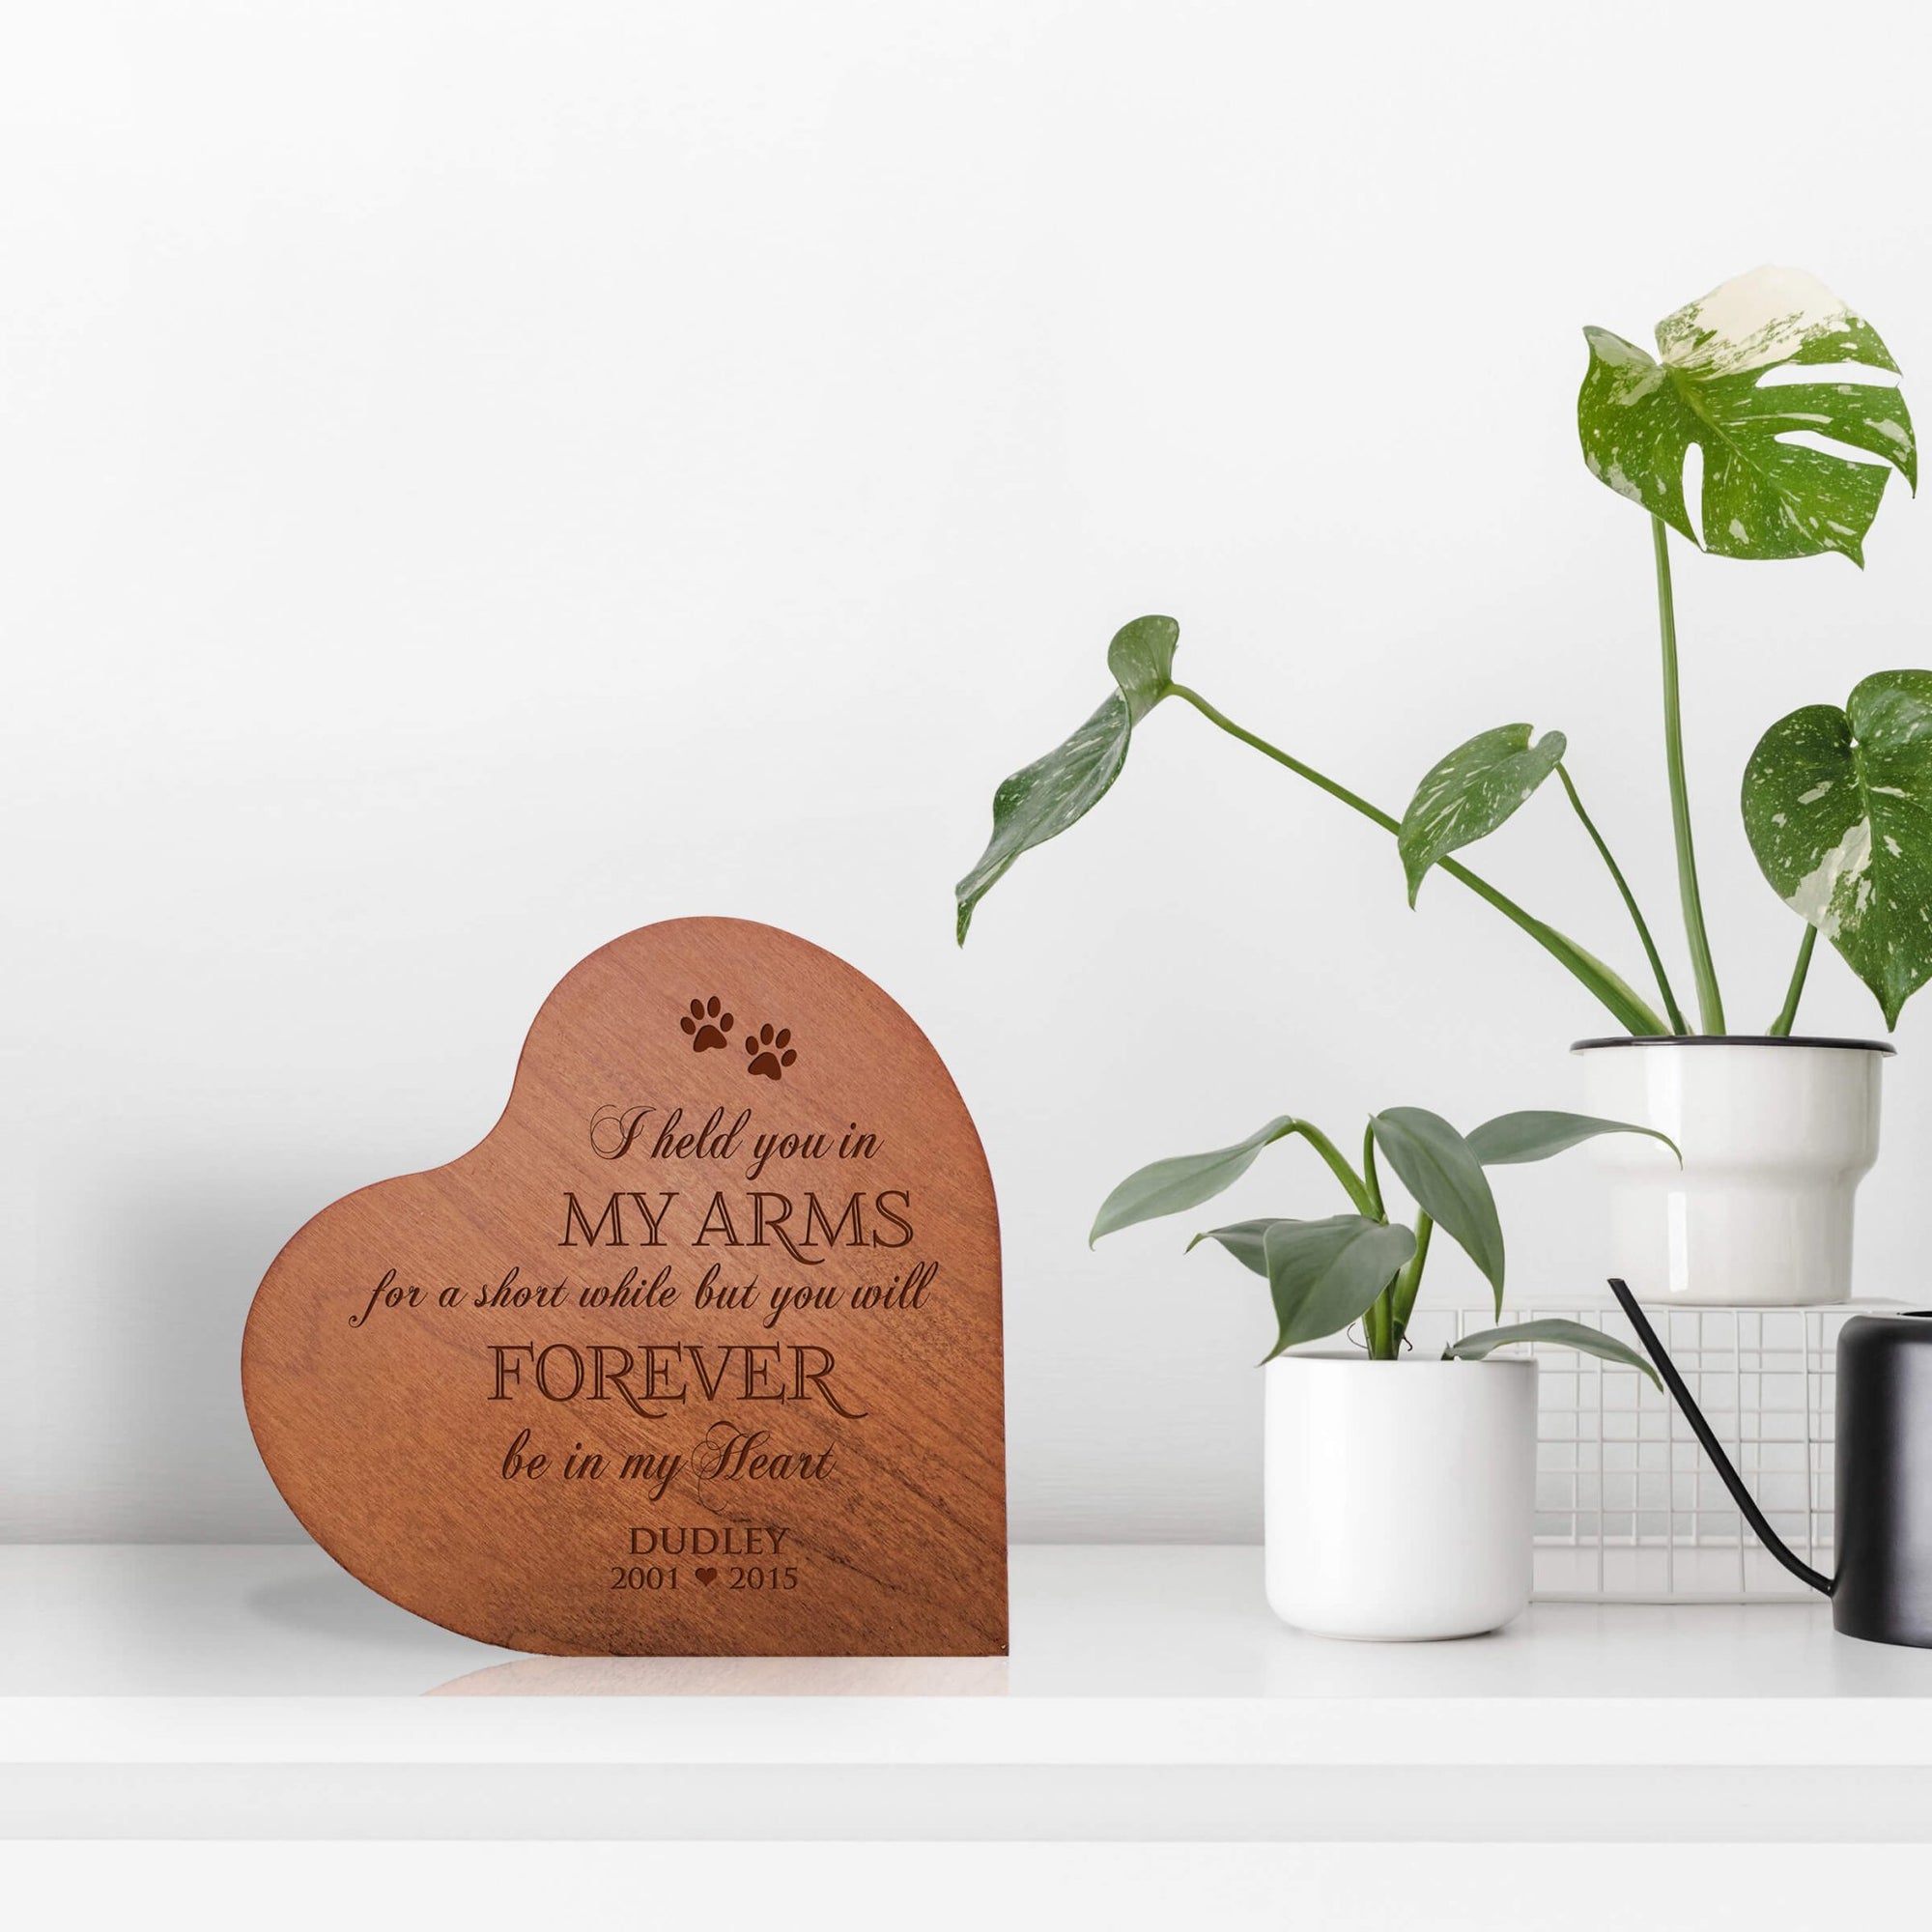 Personalized Small Heart Cremation Urn Keepsake For Pet Ashes - I Held You In My Arms - LifeSong Milestones